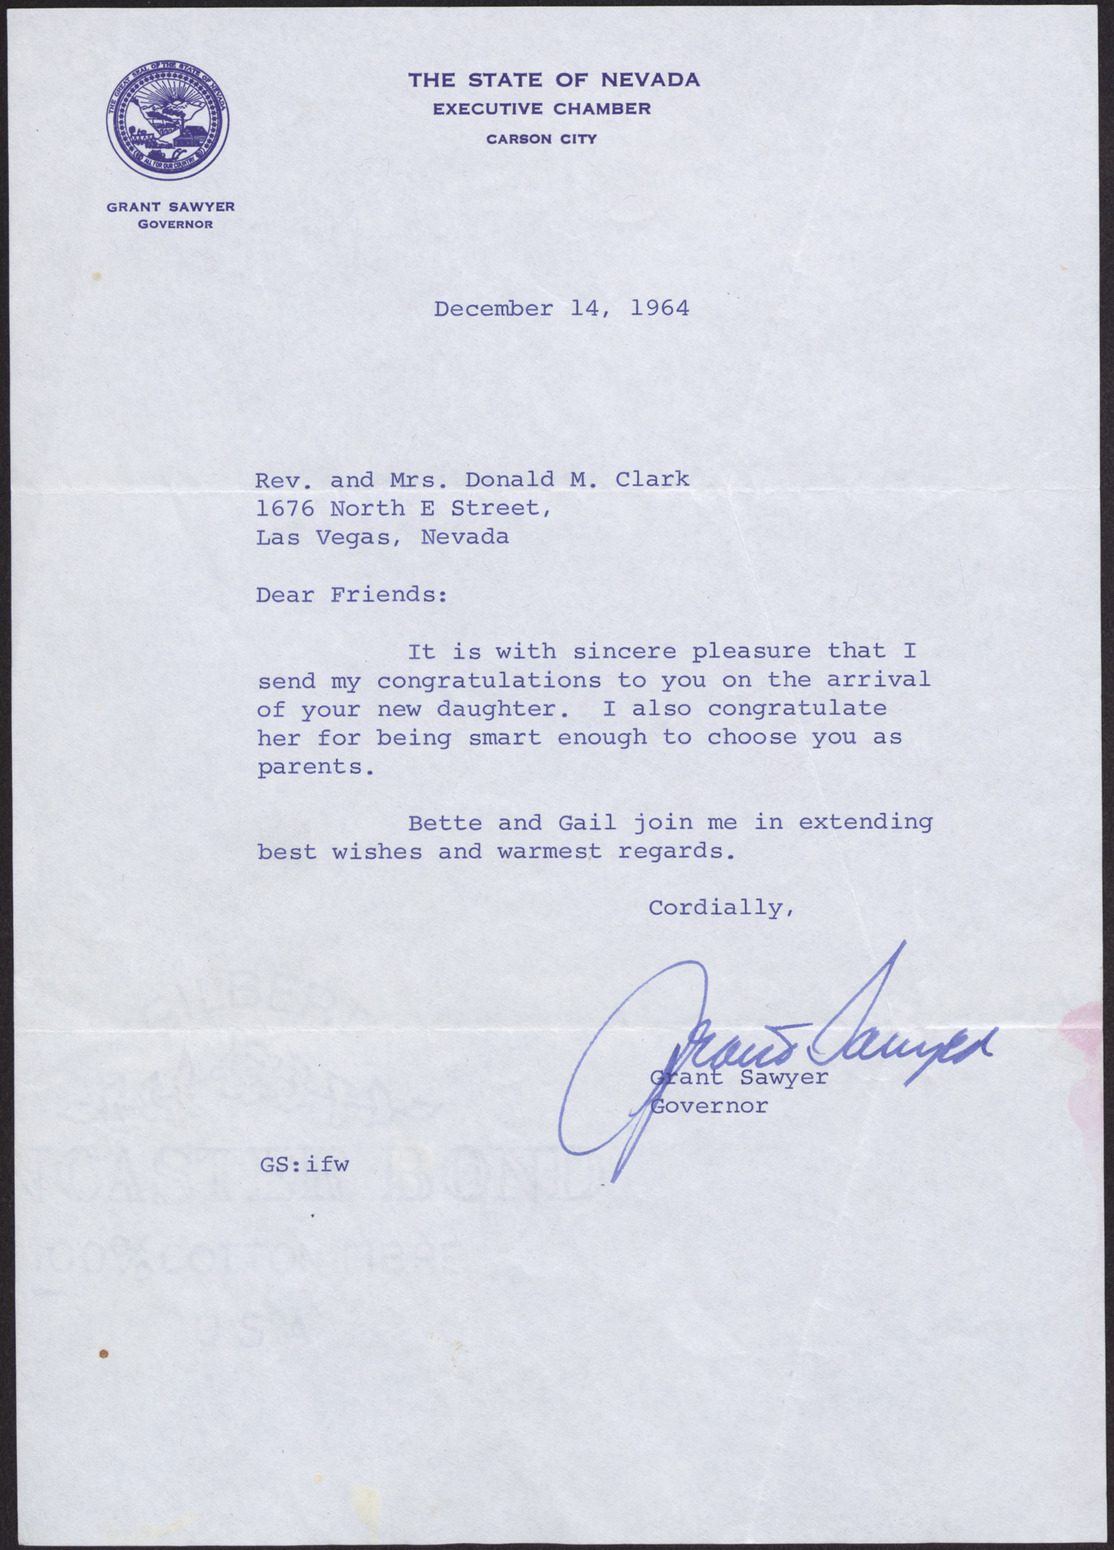 Letter to Rev. and Mrs. Donald M. Clark from Governor Grant Sawyer, December 14, 1964